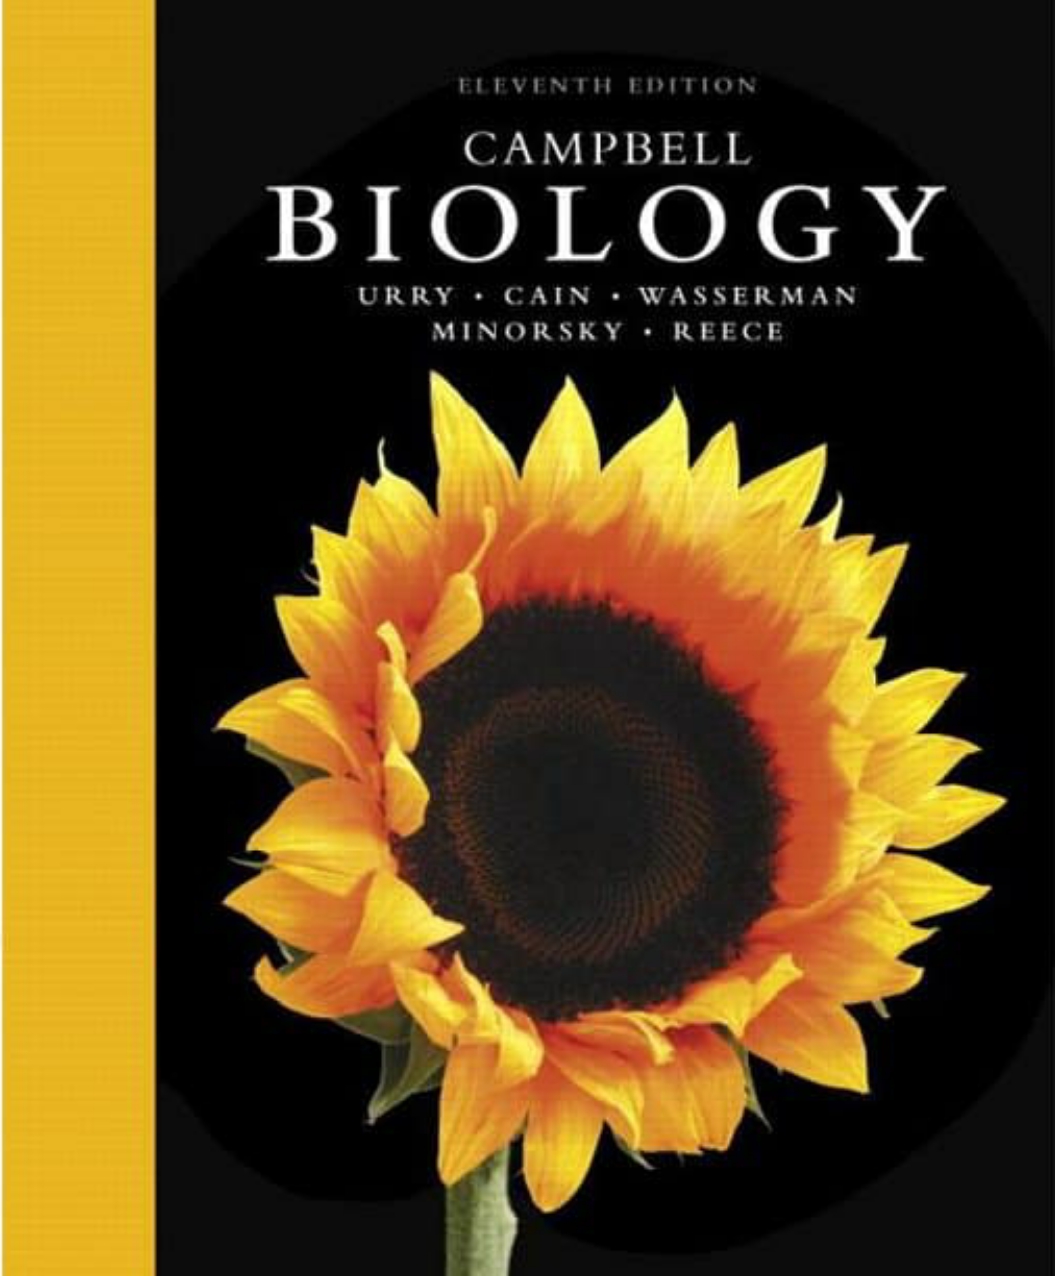 Download Best Biology Textbook of the Century "Campbell Biology Textbook 11th Edition"